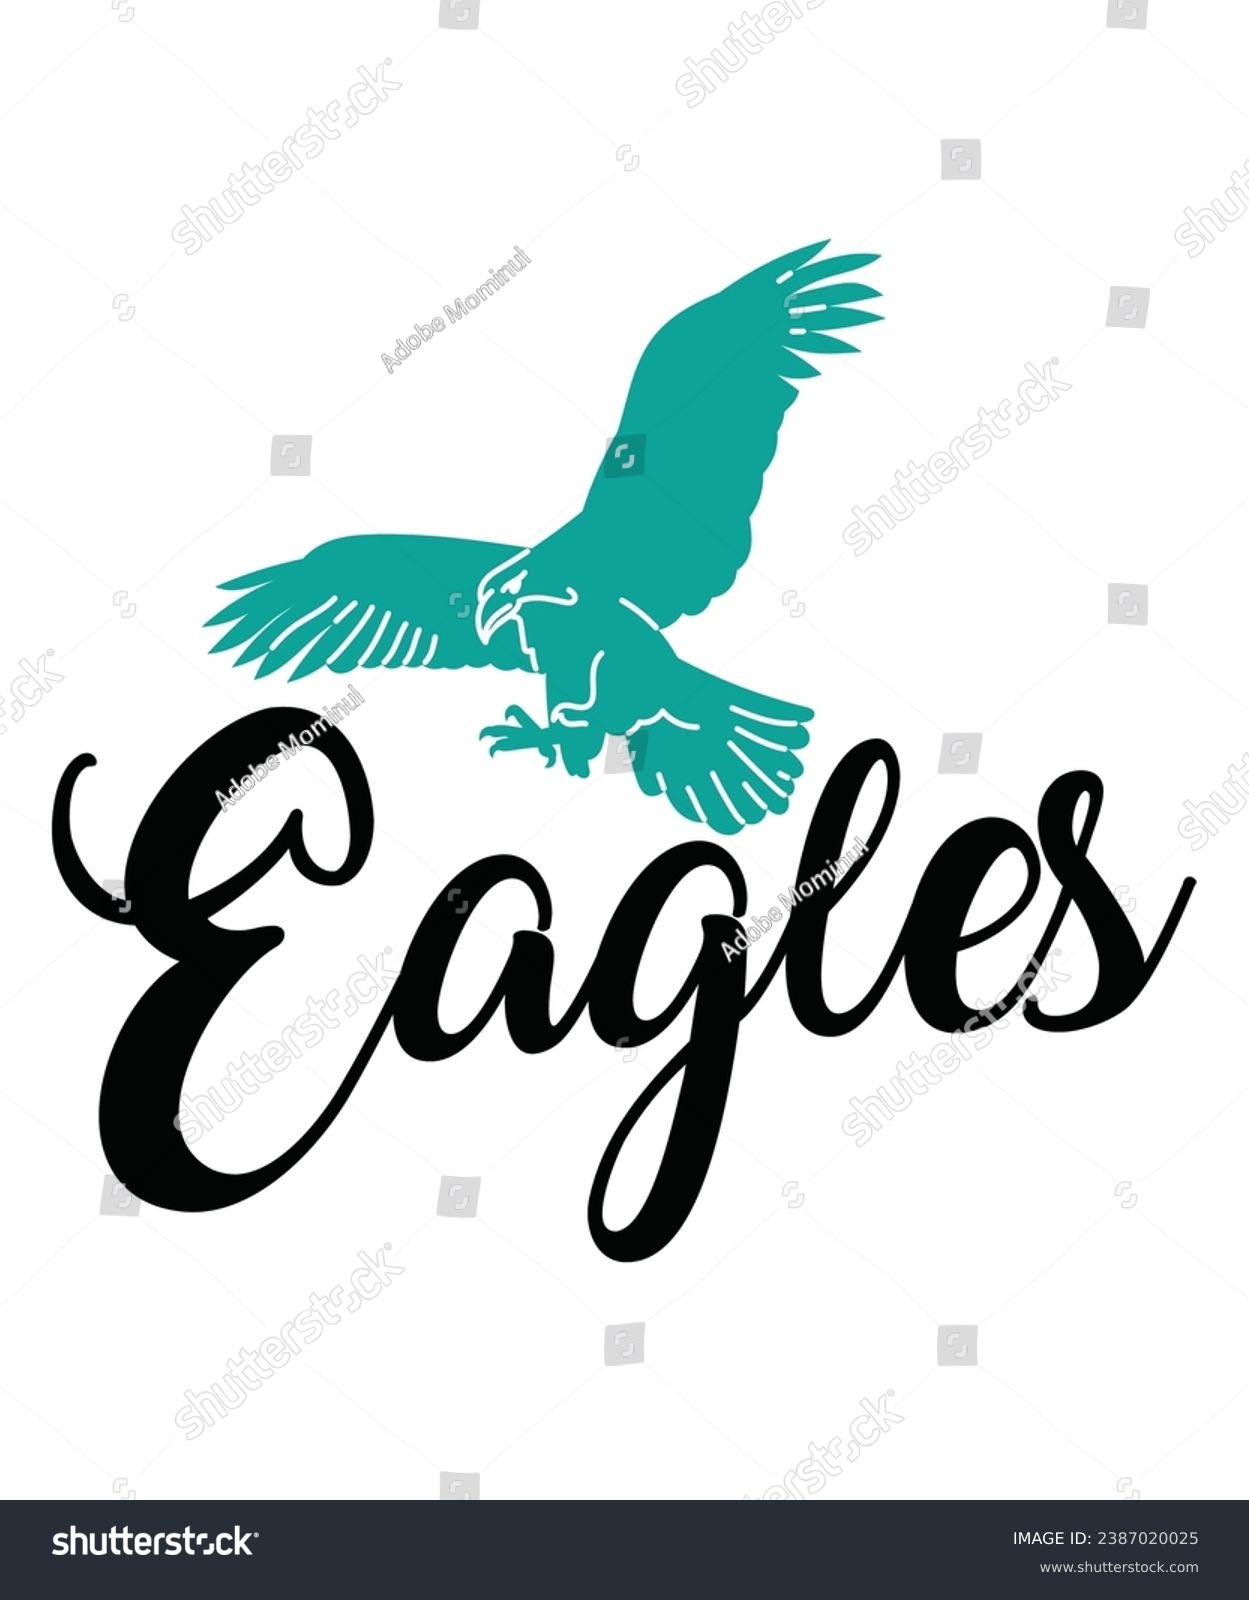 SVG of Flying Eagle Design for T-shirts, Logos, prints, wall art, T-shirt,Typography,Circuit, Silhouette svg